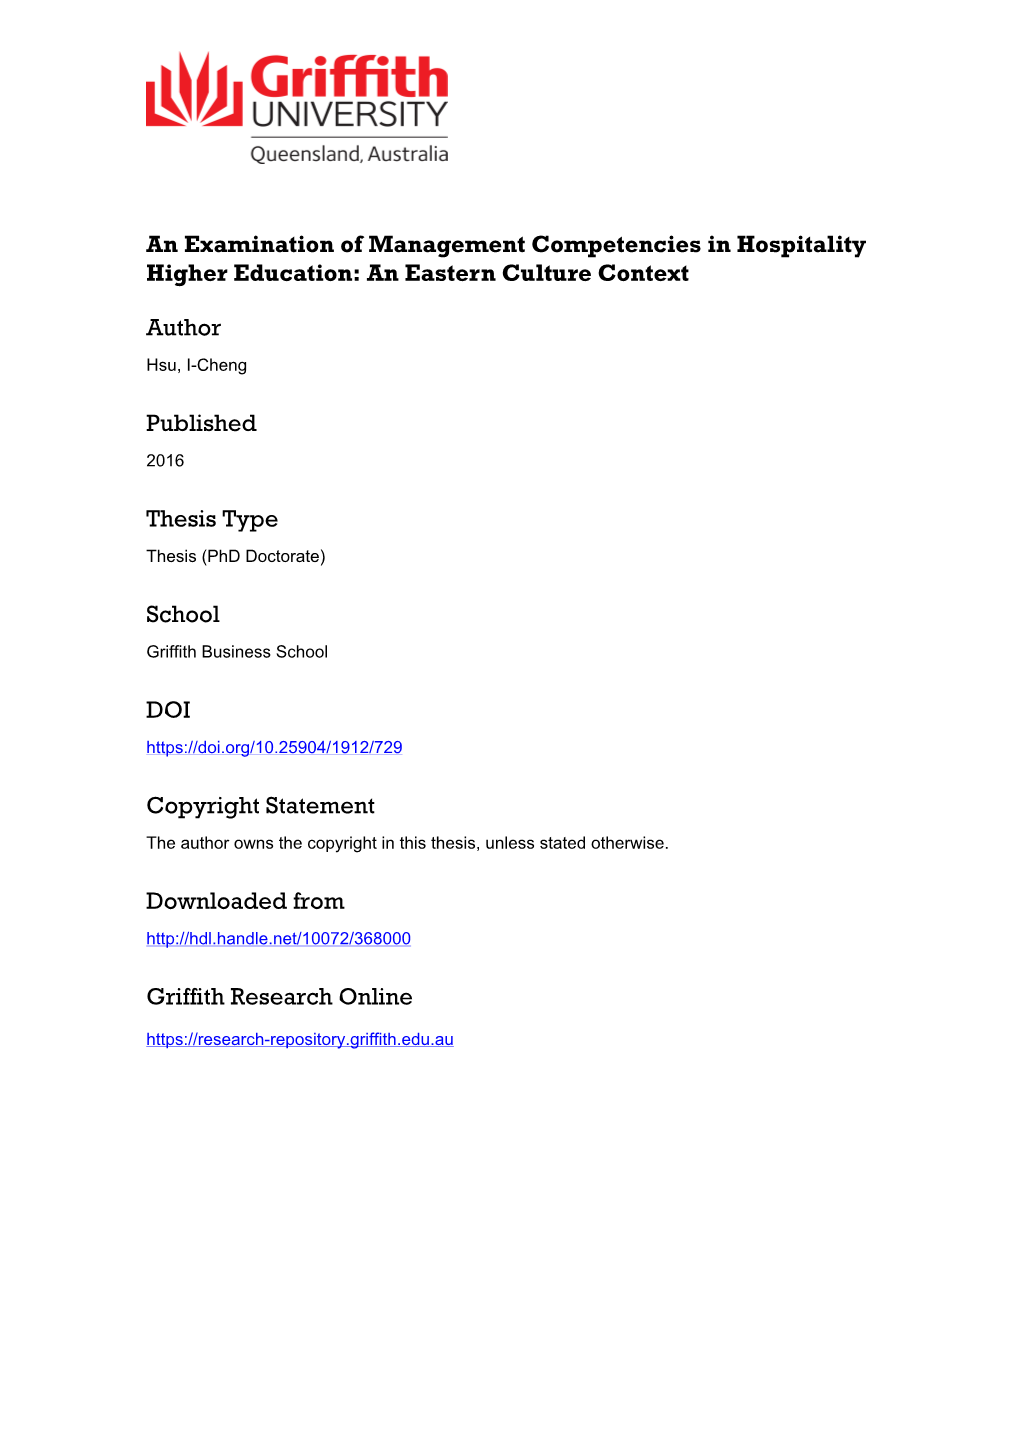 An Examination of Management Competencies in Hospitality Higher Education: an Eastern Culture Context